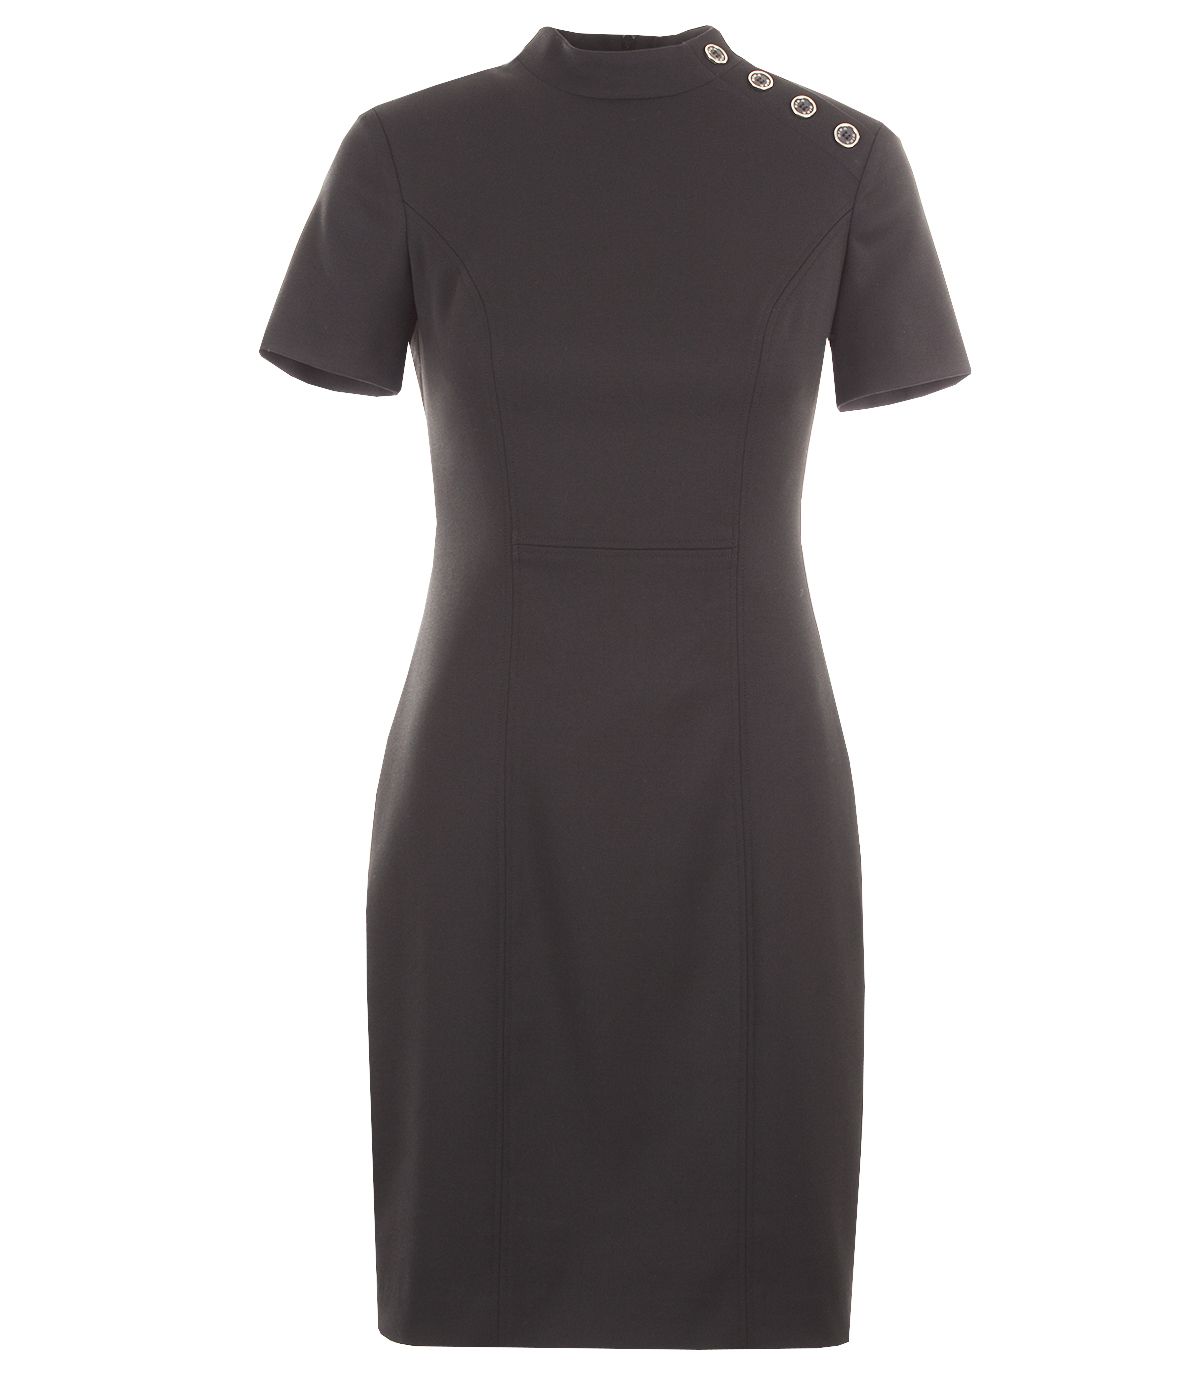 Semi-turtleneck dress with side buttons, short sleeves, rayon and viscose 0